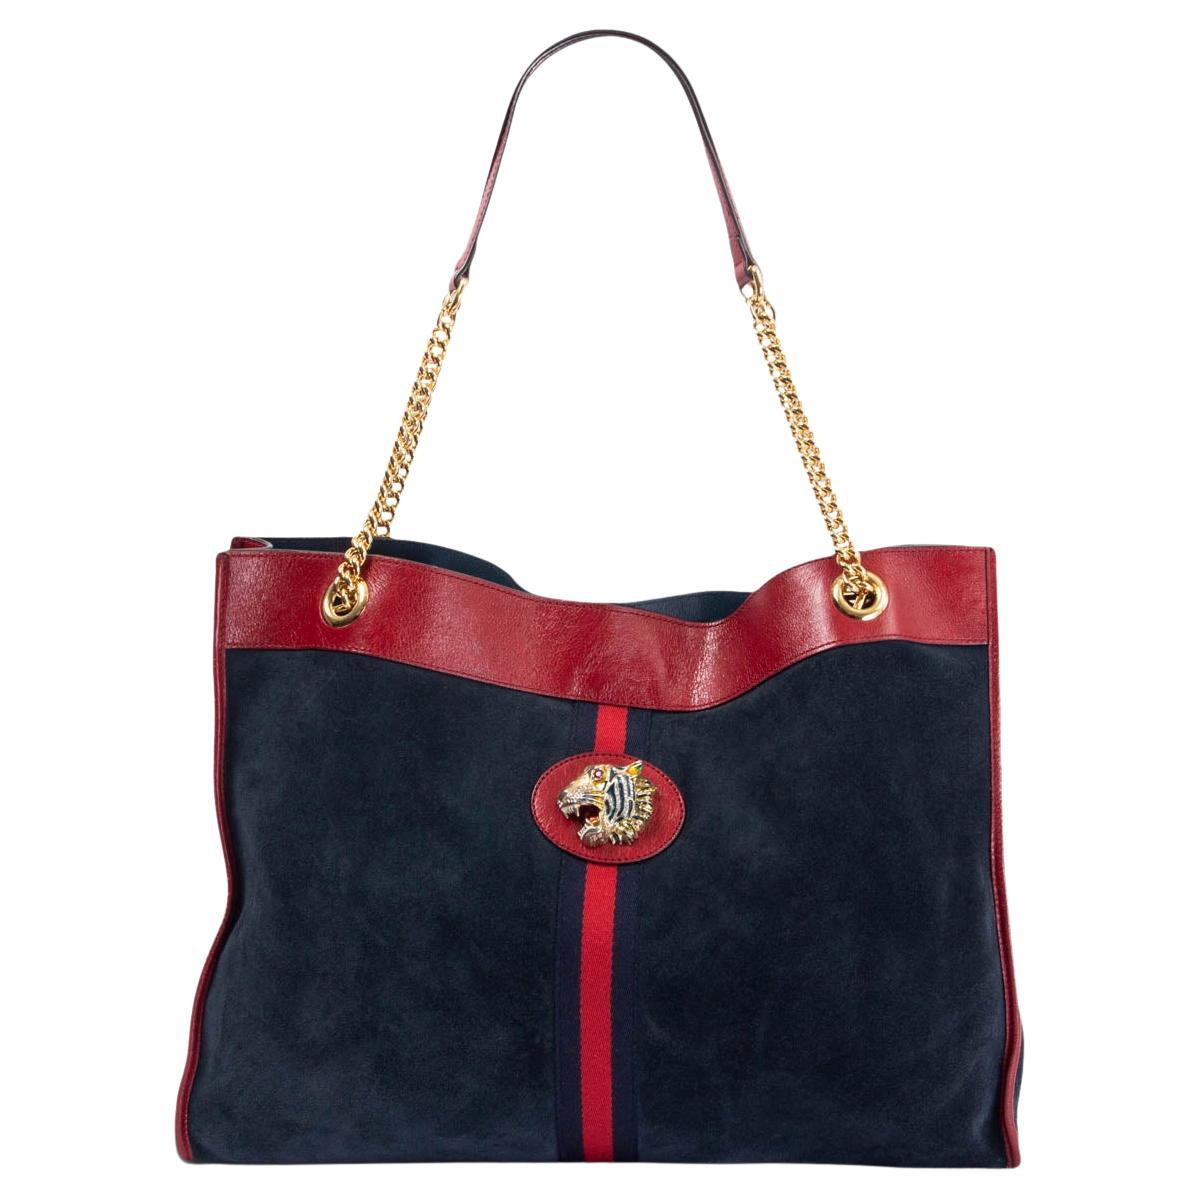 GUCCI navy blue suede & red leather RAJA LARGE TOTE Shoulder Bag For Sale